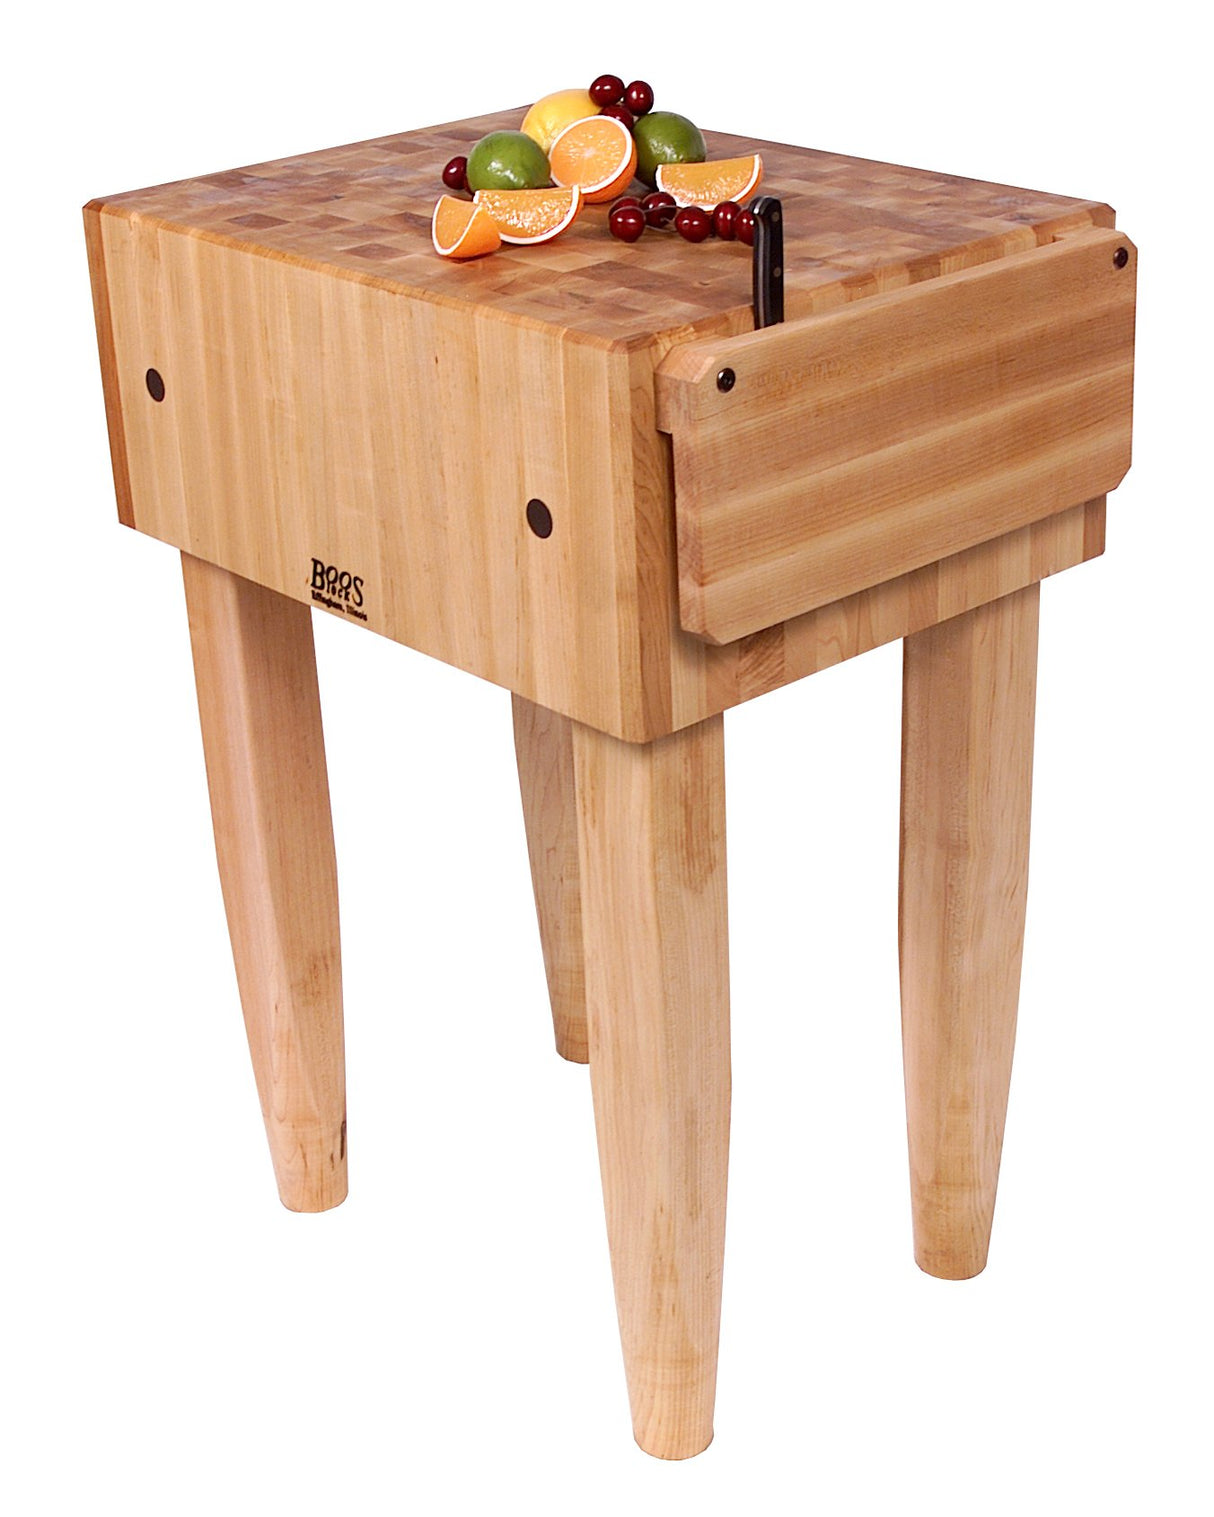 John Boos PCA2-C-CR Pca2 24x18x10" Maple Butcher Block w/Knife Holder and Casters,Cherry Stain Legs PCA BLOCK 24X18X10 W/HOLDER/CAS CRM